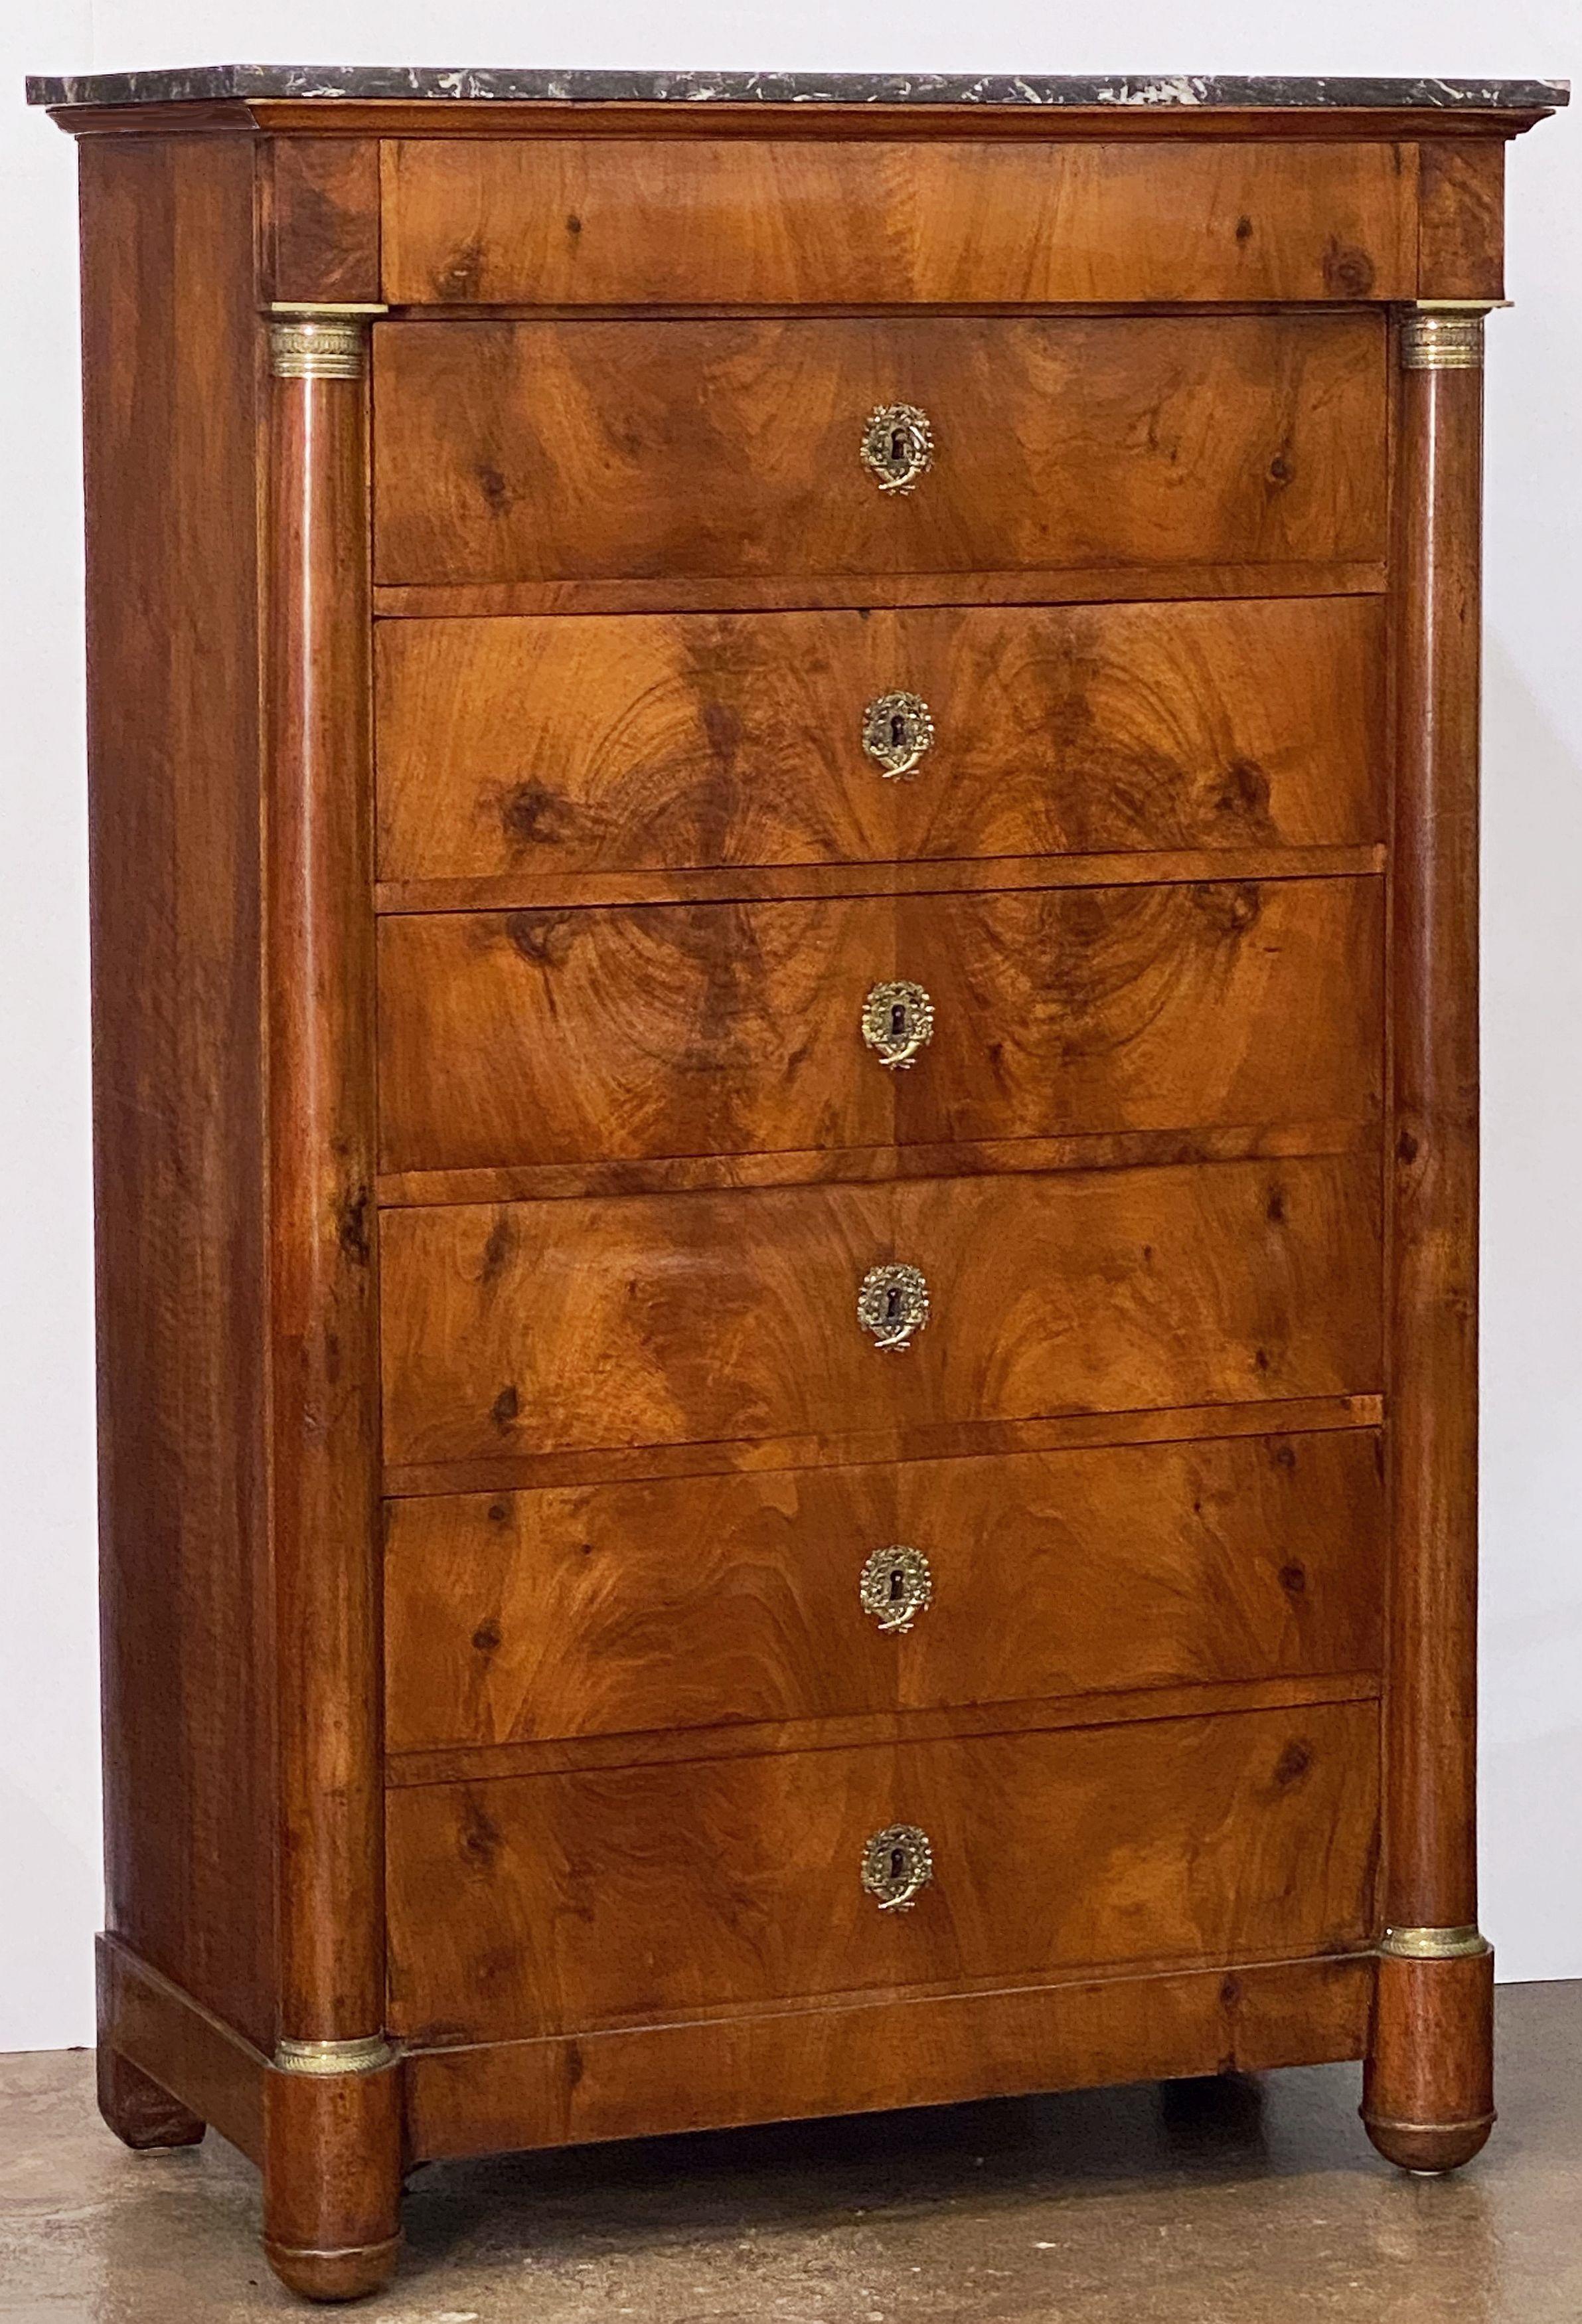 A handsome French semainier or tall chest of walnut with marble top, featuring a slightly narrower top drawer over six larger drawers beneath. 
The drawer fronts with beautiful carefully matched walnut veneers. 
The six larger drawers have